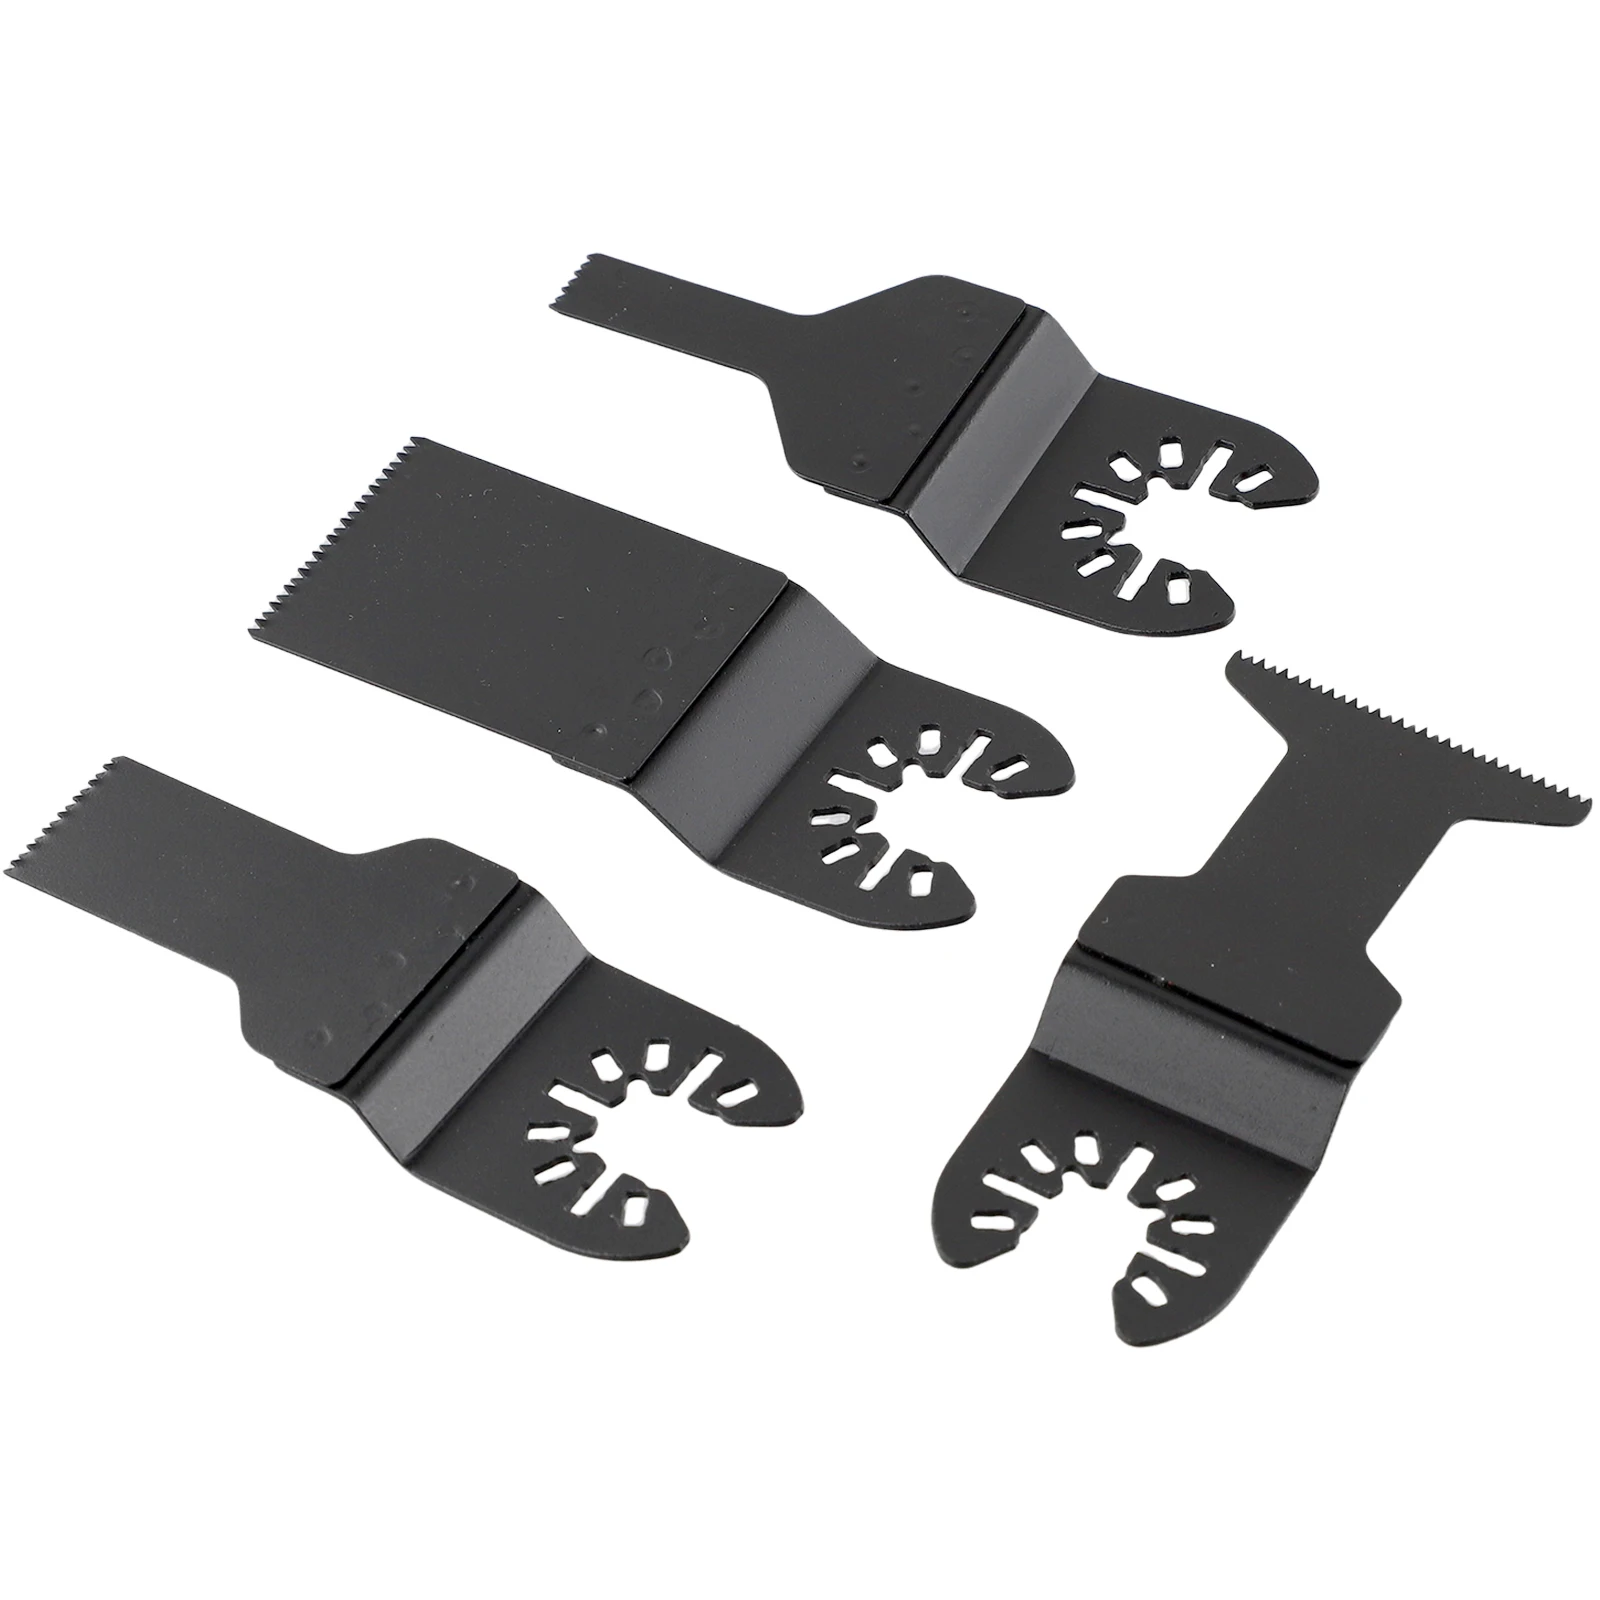 Parkside Power Multitool Accessories Oscillating Circular Saw Blade High Carbon Steel For Renovator Soft Metal Plastic Cut 4pcs